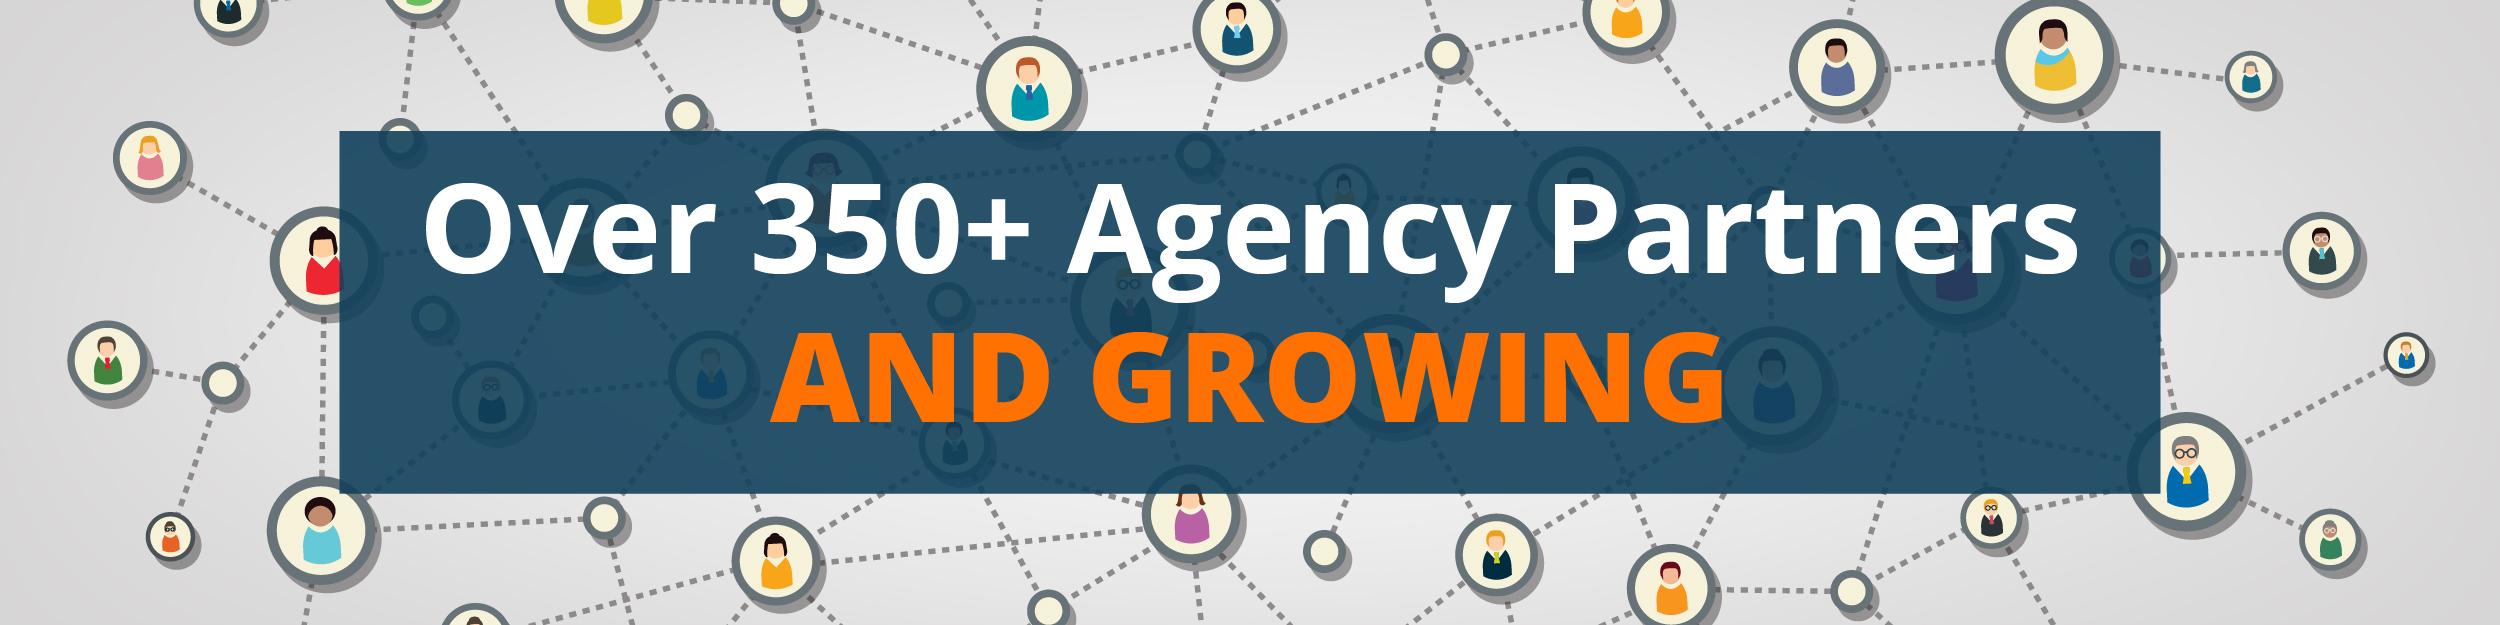 Over 350+ Agency Partners and Growing